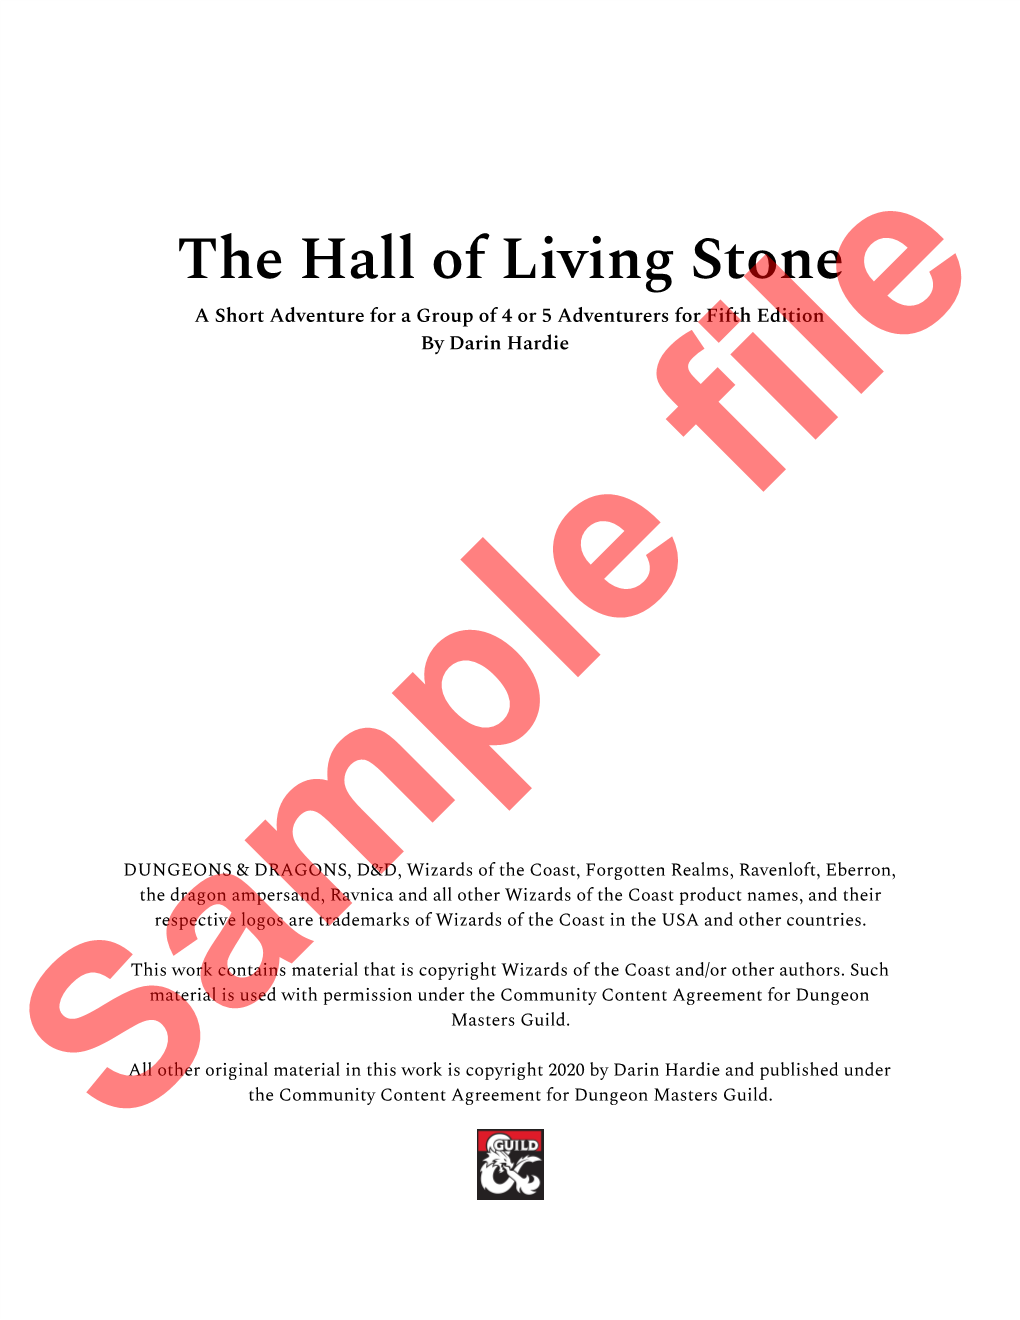 The Hall of Living Stone a Short Adventure for a Group of 4 Or 5 Adventurers for Fifth Edition by Darin Hardie